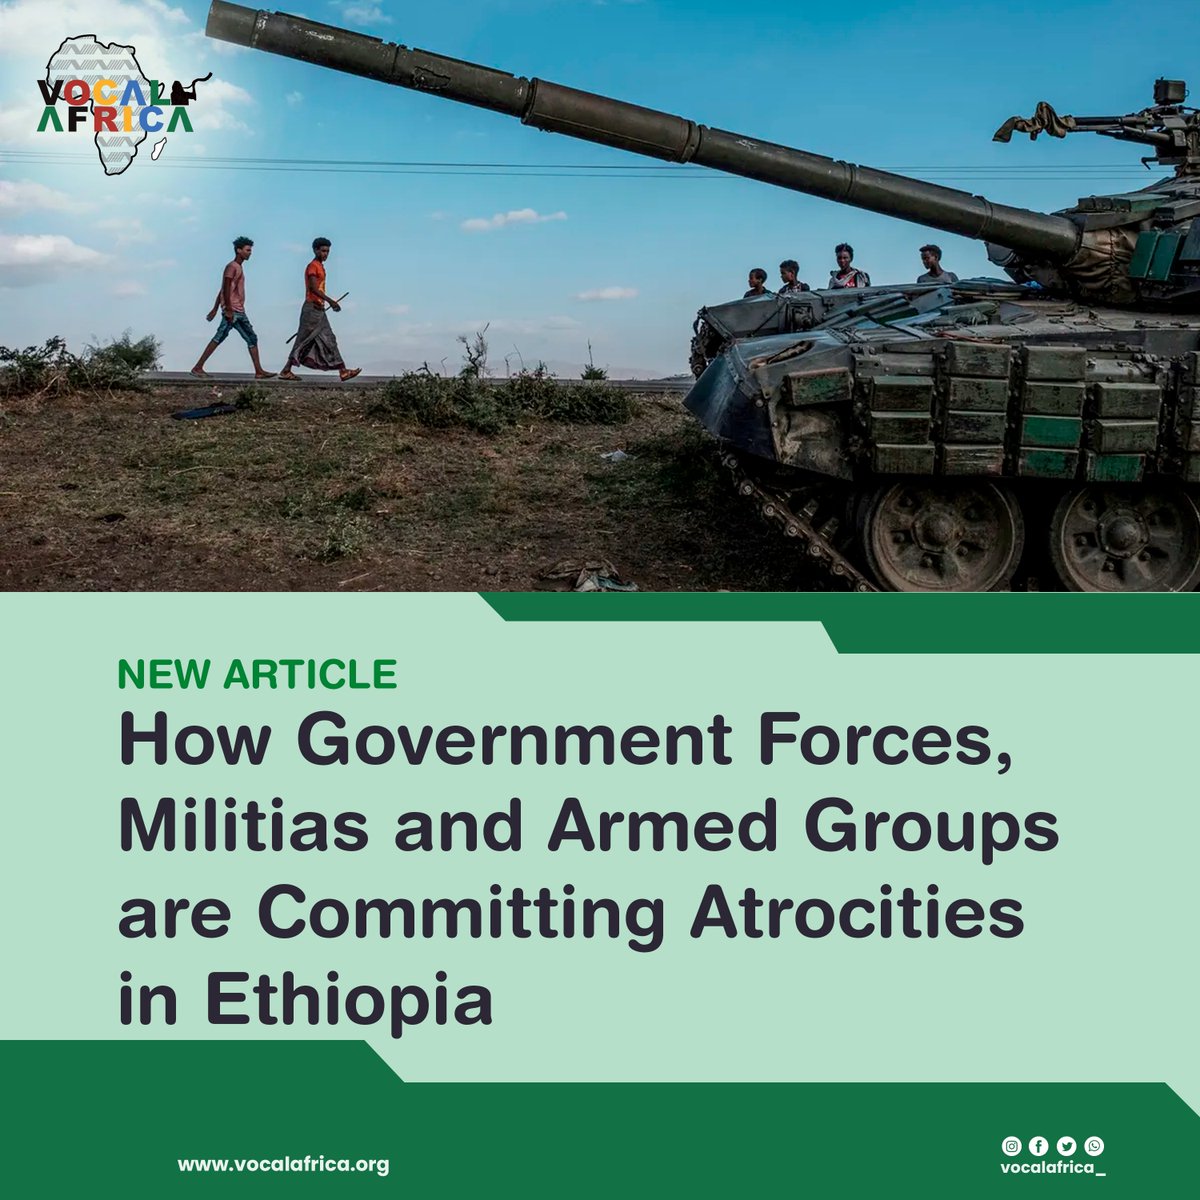 Our latest article sheds light on the alarming atrocities committed by government forces, militias and armed groups in #Ethiopia Read👉rb.gy/tc0ph3 #Ethiopia #Tigray #Amhara